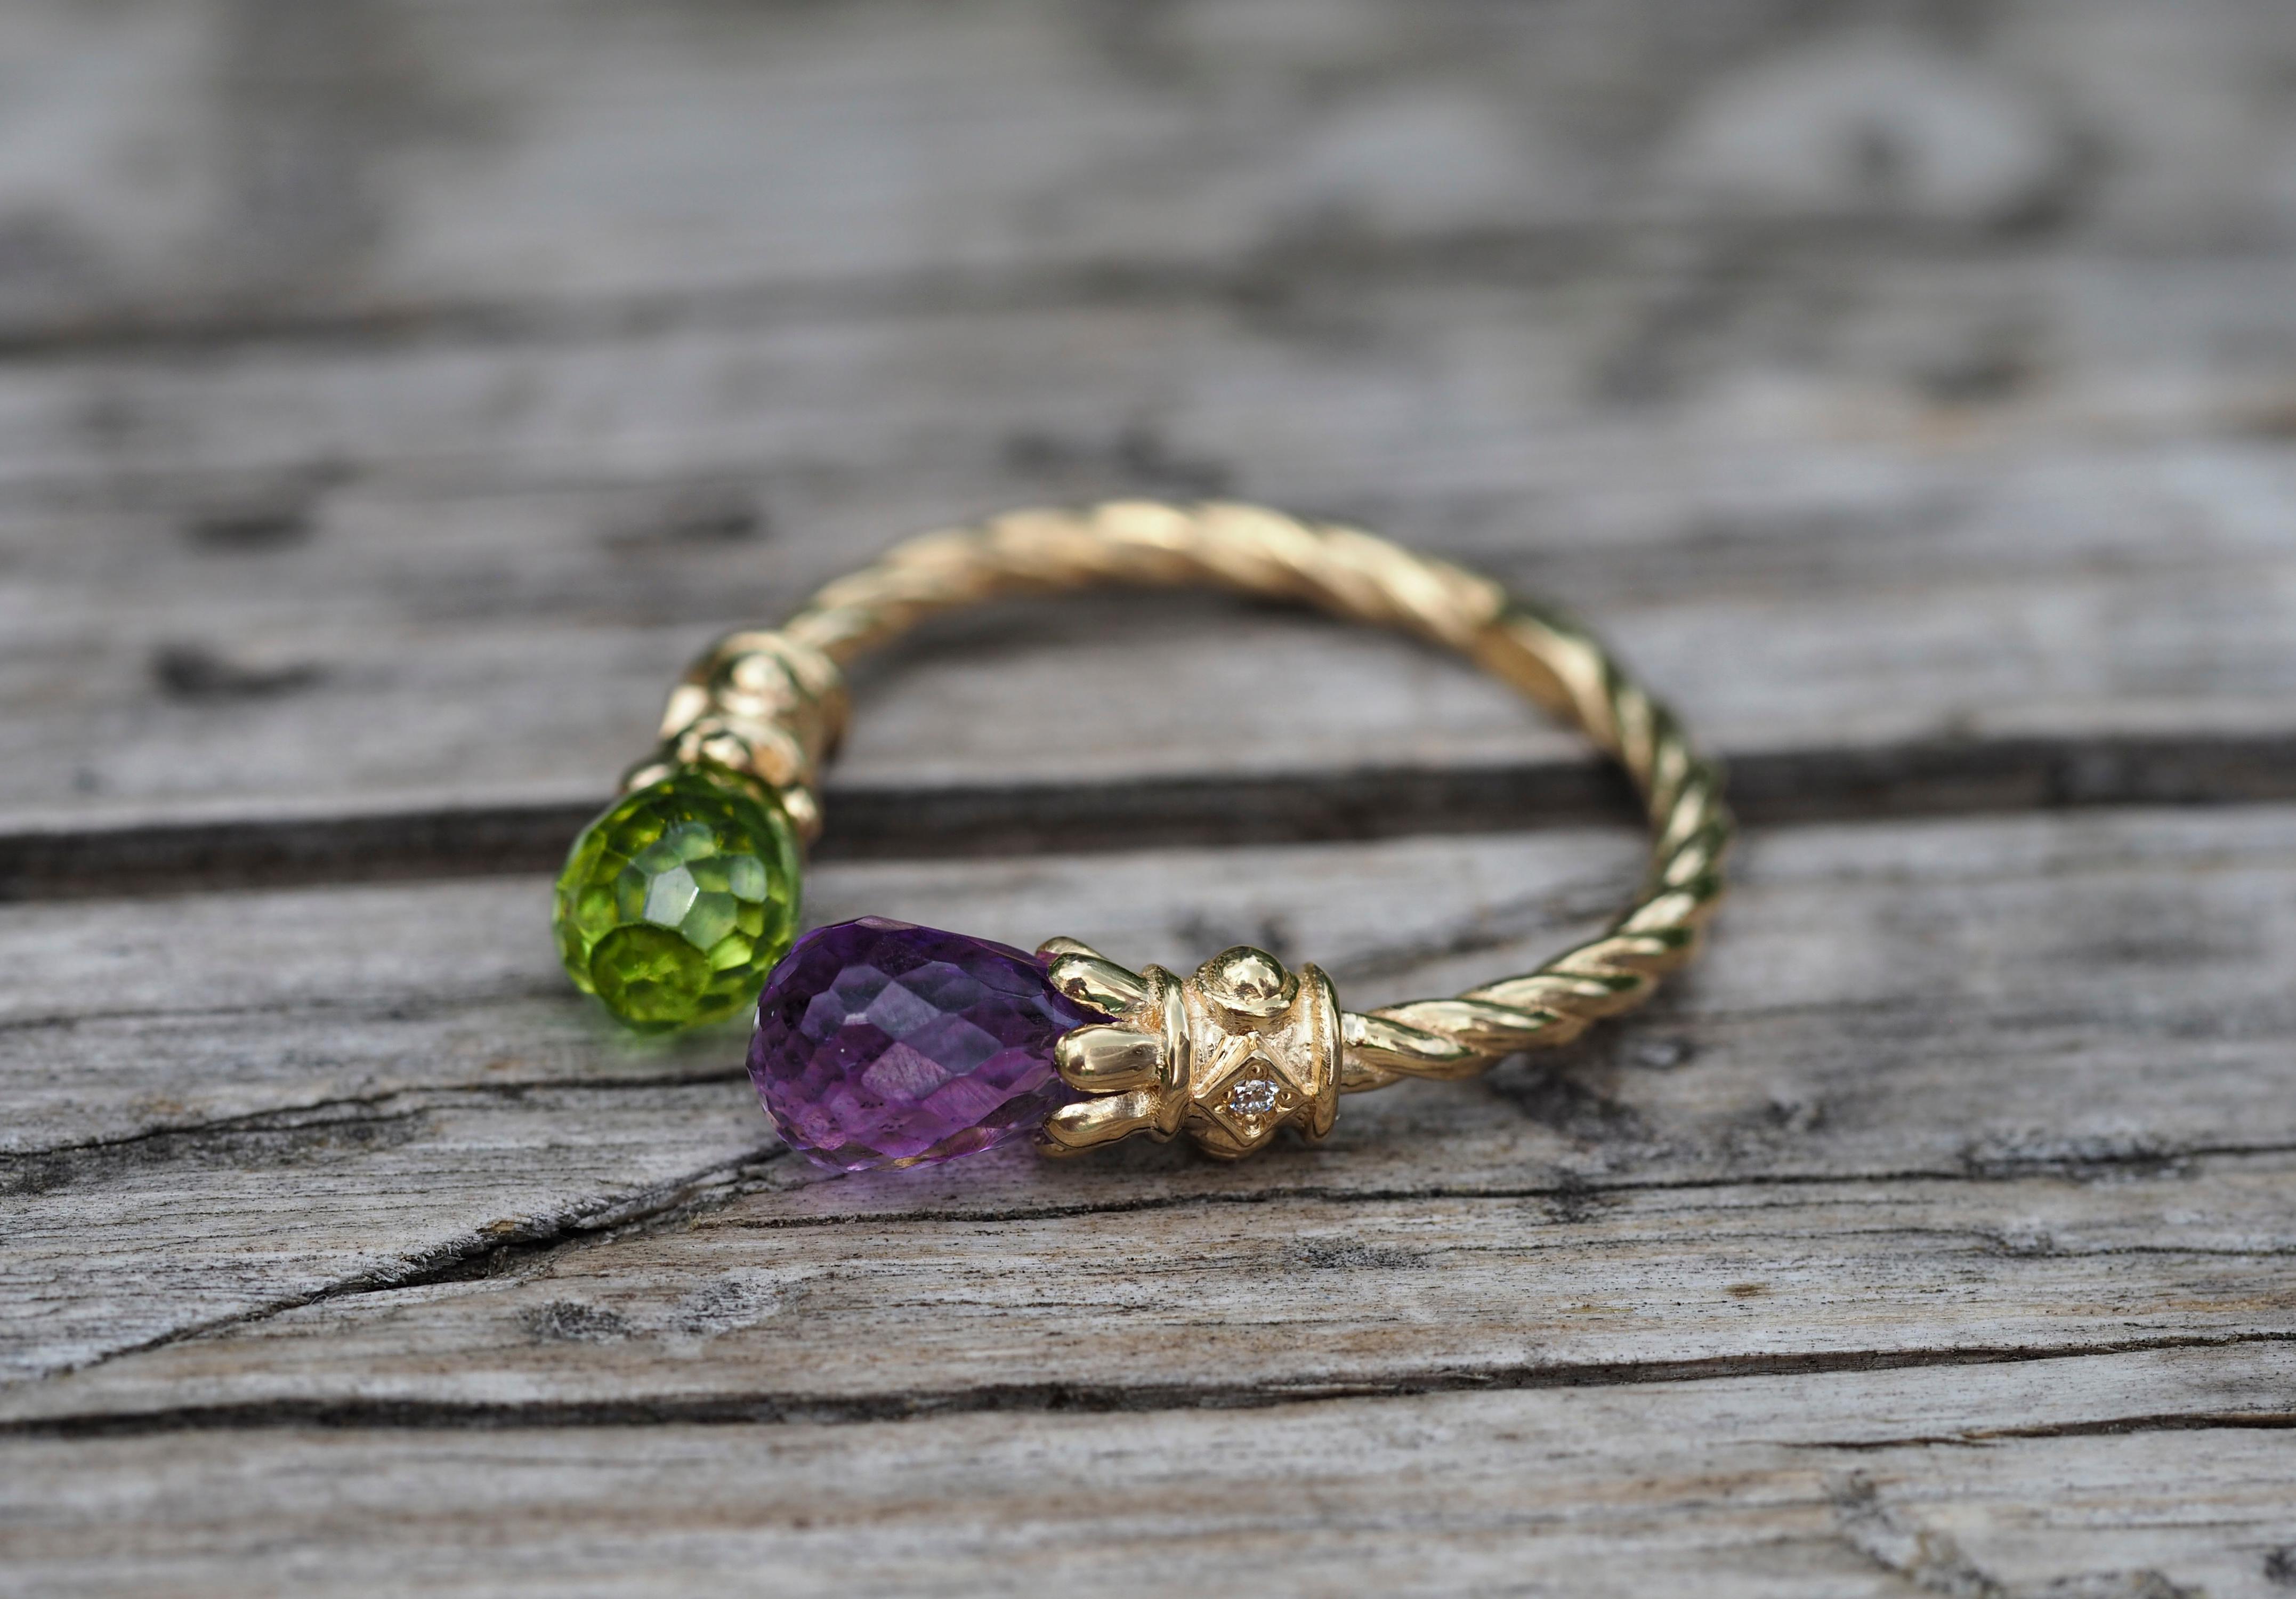 Amethyst, Peridot 14k gold ring. 
Briolette amethyst, peridot gold ring. Open enged, adjustable ring. Twisted gold ring. Two gemstone ring.

Total weight: 2.60 g. depends from size.
Metal: 14k gold

Stones:
Peridot:
Cut: Briolette
Weight: approx 1.0